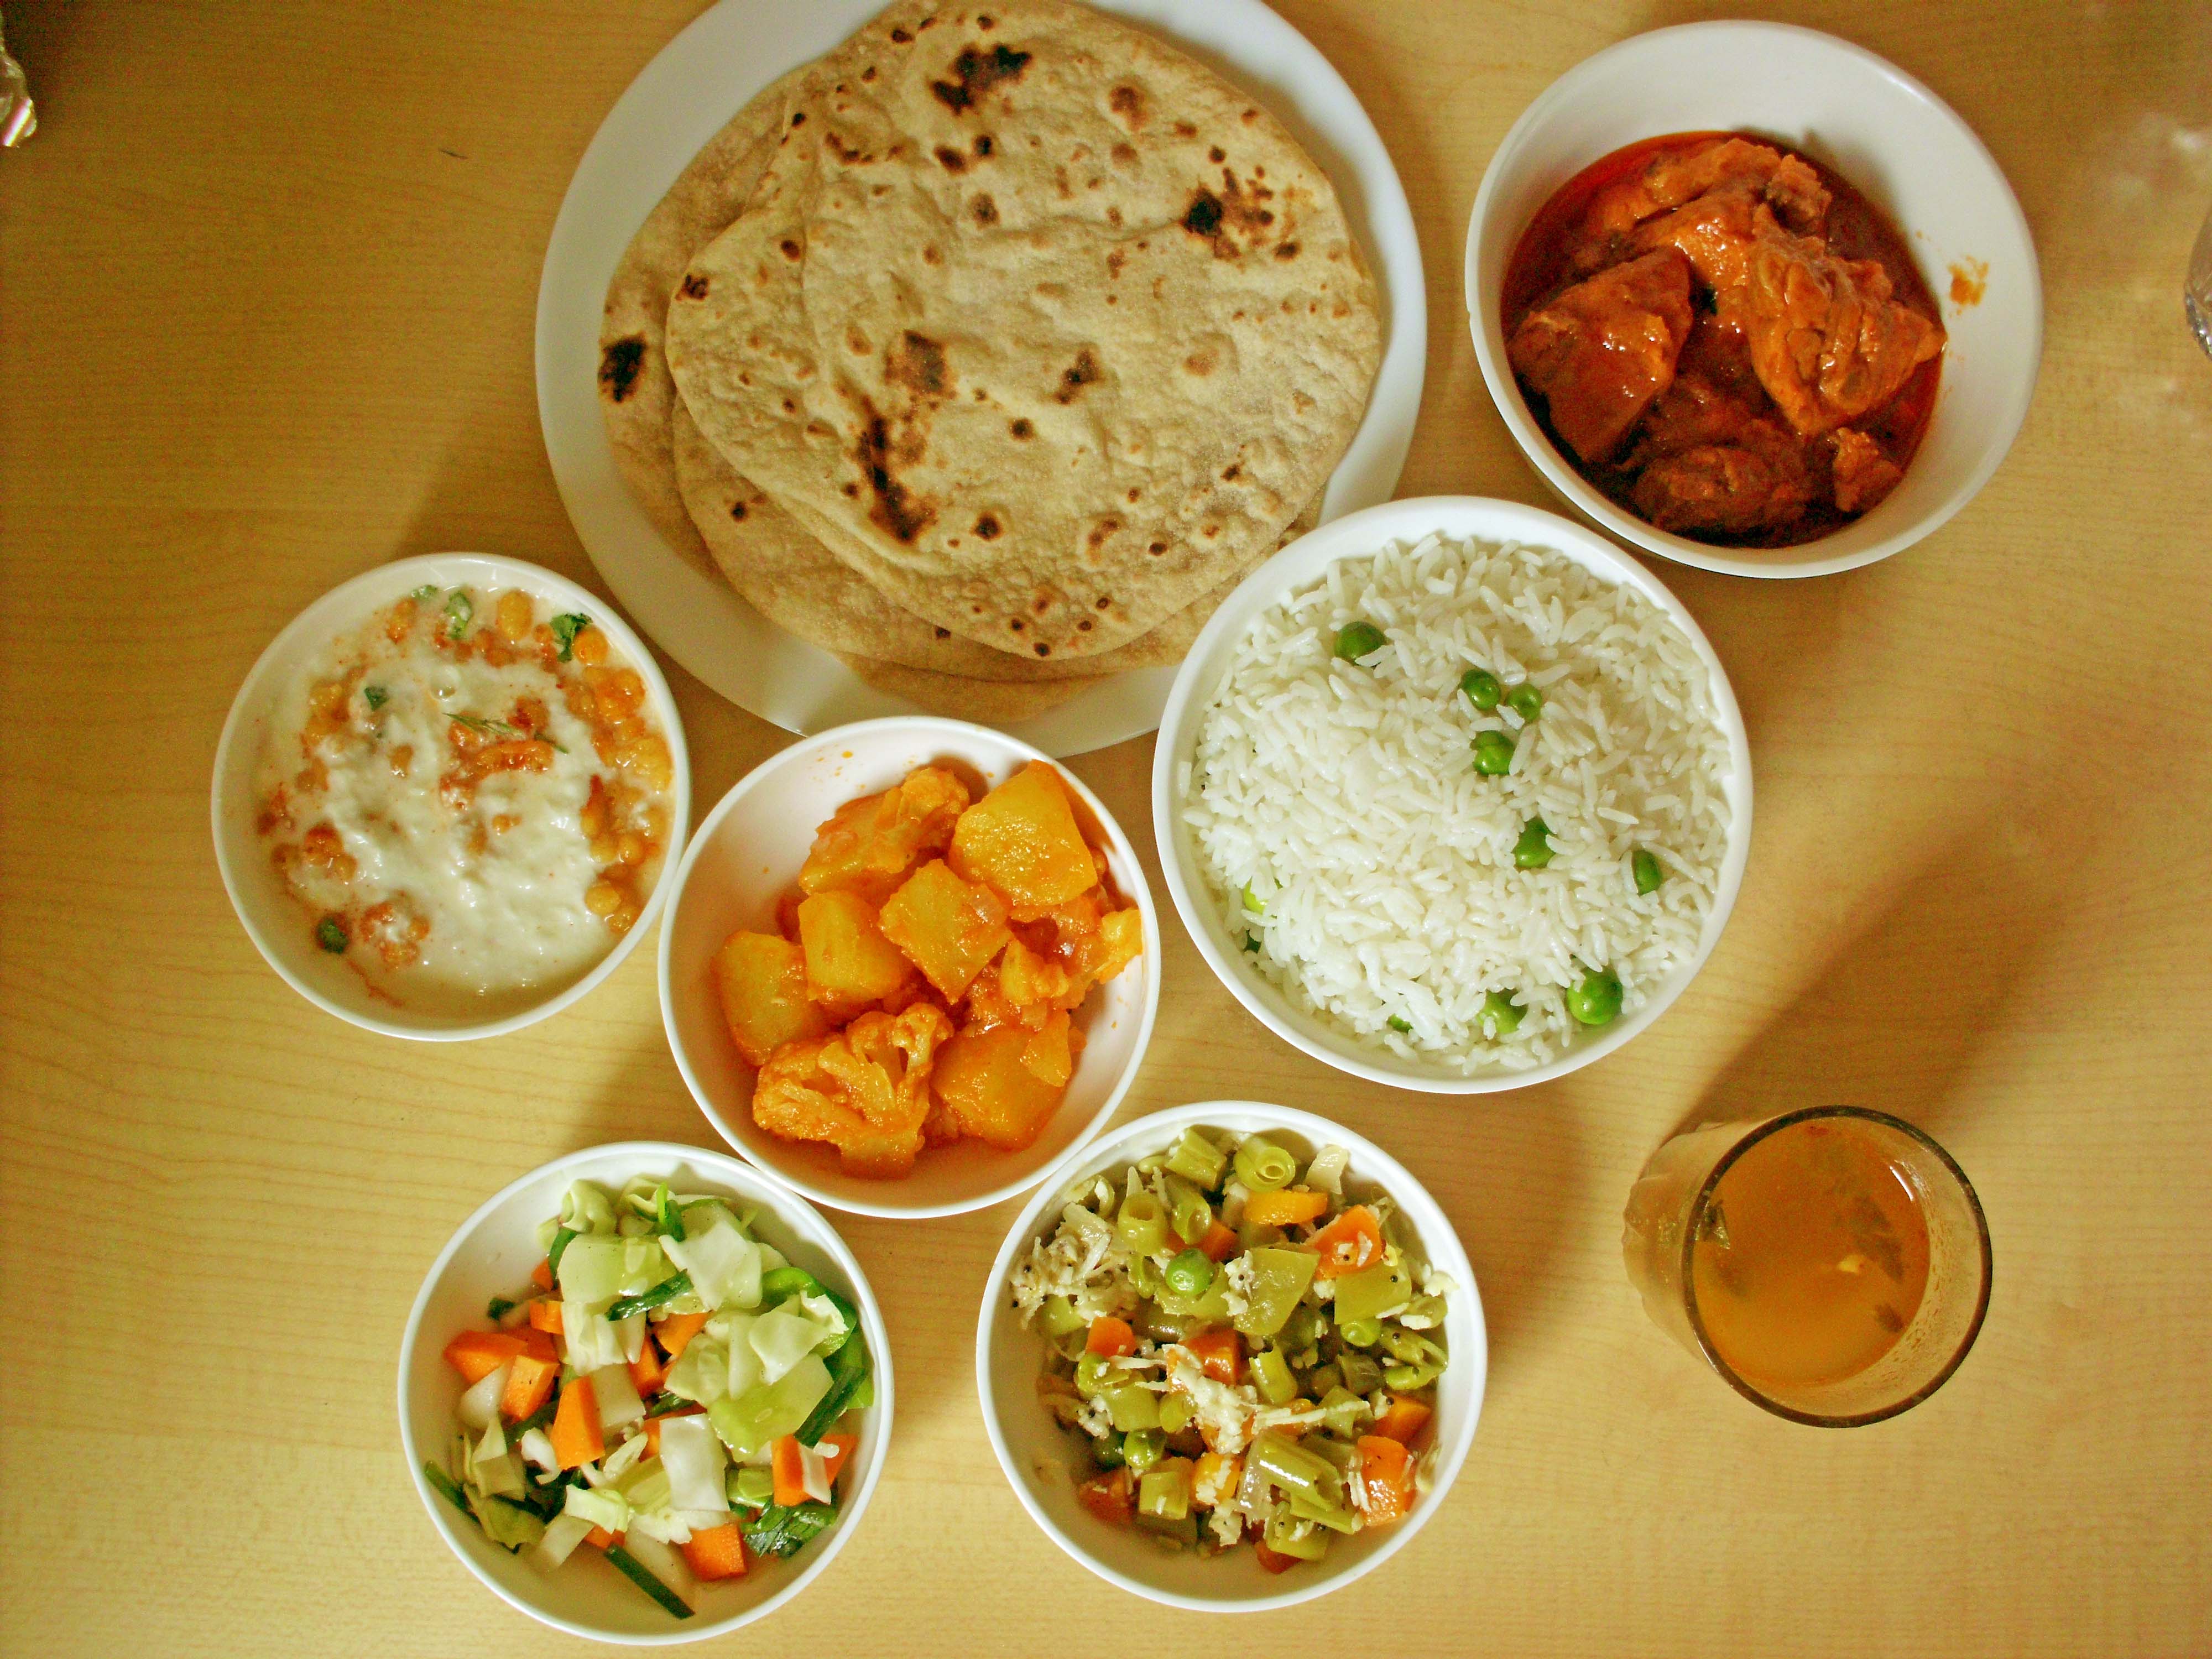 https://upload.wikimedia.org/wikipedia/commons/7/78/Indian_Meal_with_Roti_and_Rice_-_DSCI0006.jpg